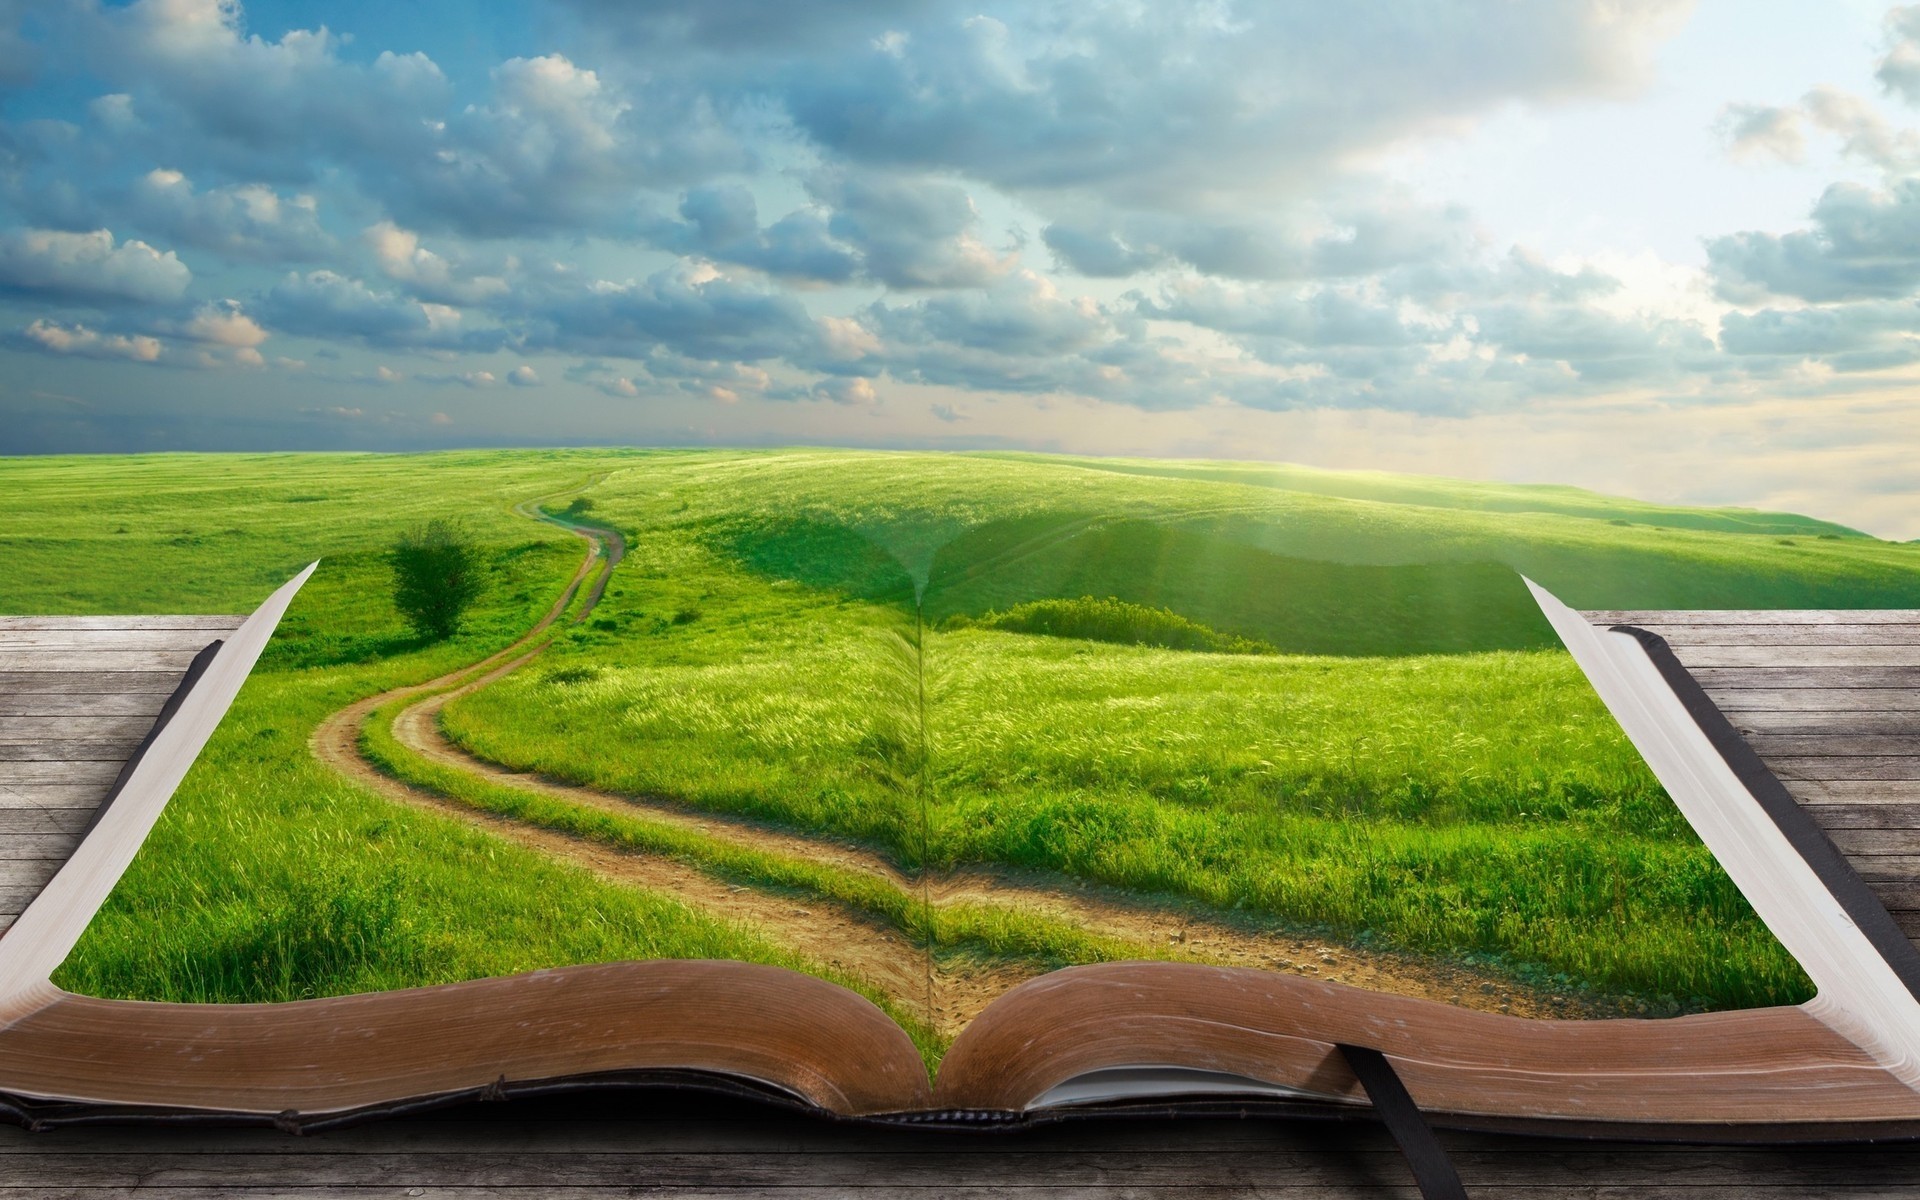 fantasy grass landscape road field guidance sky travel hayfield summer nature rural lawn agriculture countryside outdoors cloud country sight grassland book roads